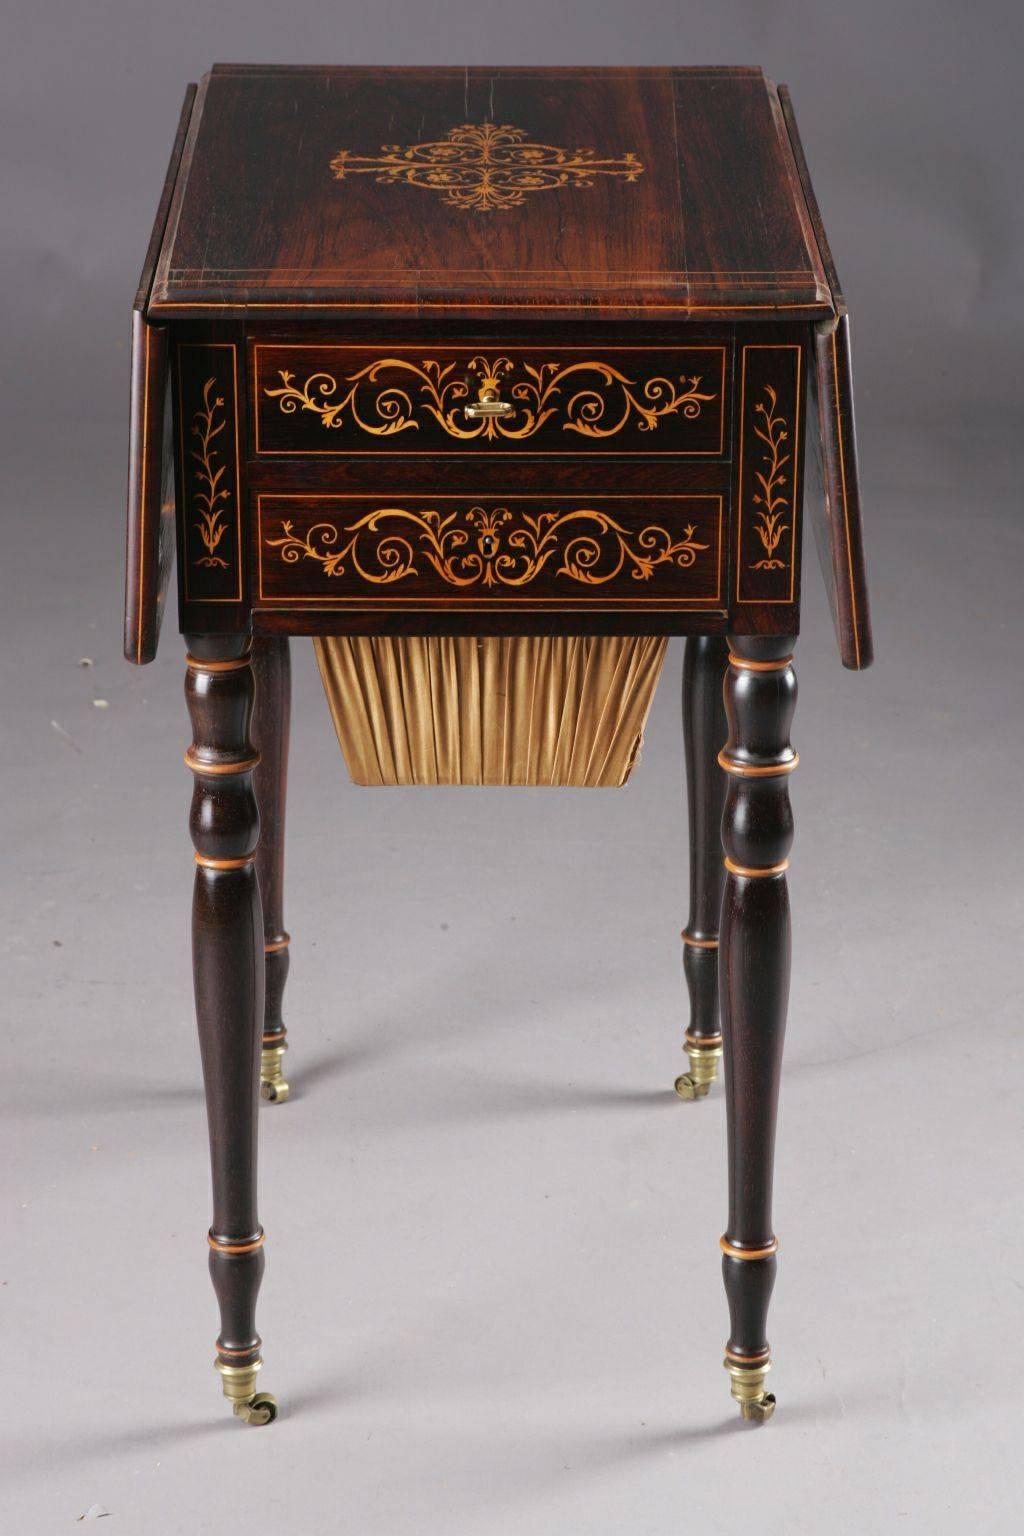 Exceptional English sewing table, circa 1825. Mahogony on solid hardwood. Two-handed frame box, including woolen containers on balustrade-shaped feet in bronze caps ending in rolls. Placed on all sides with neoclassical ornaments from maple.